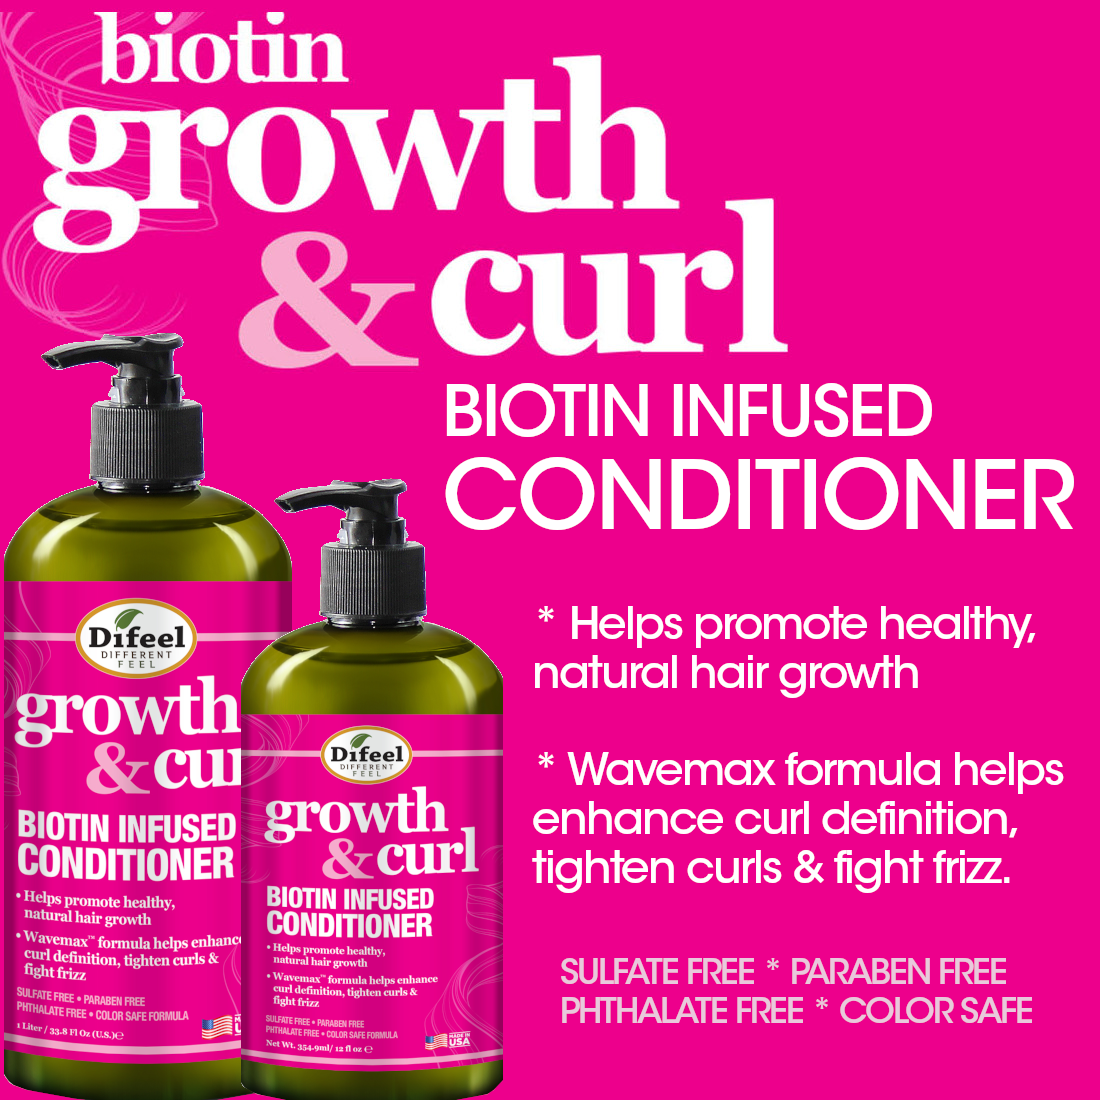 Difeel Growth and Curl Biotin Conditioner 12 oz. by difeel - find your natural beauty